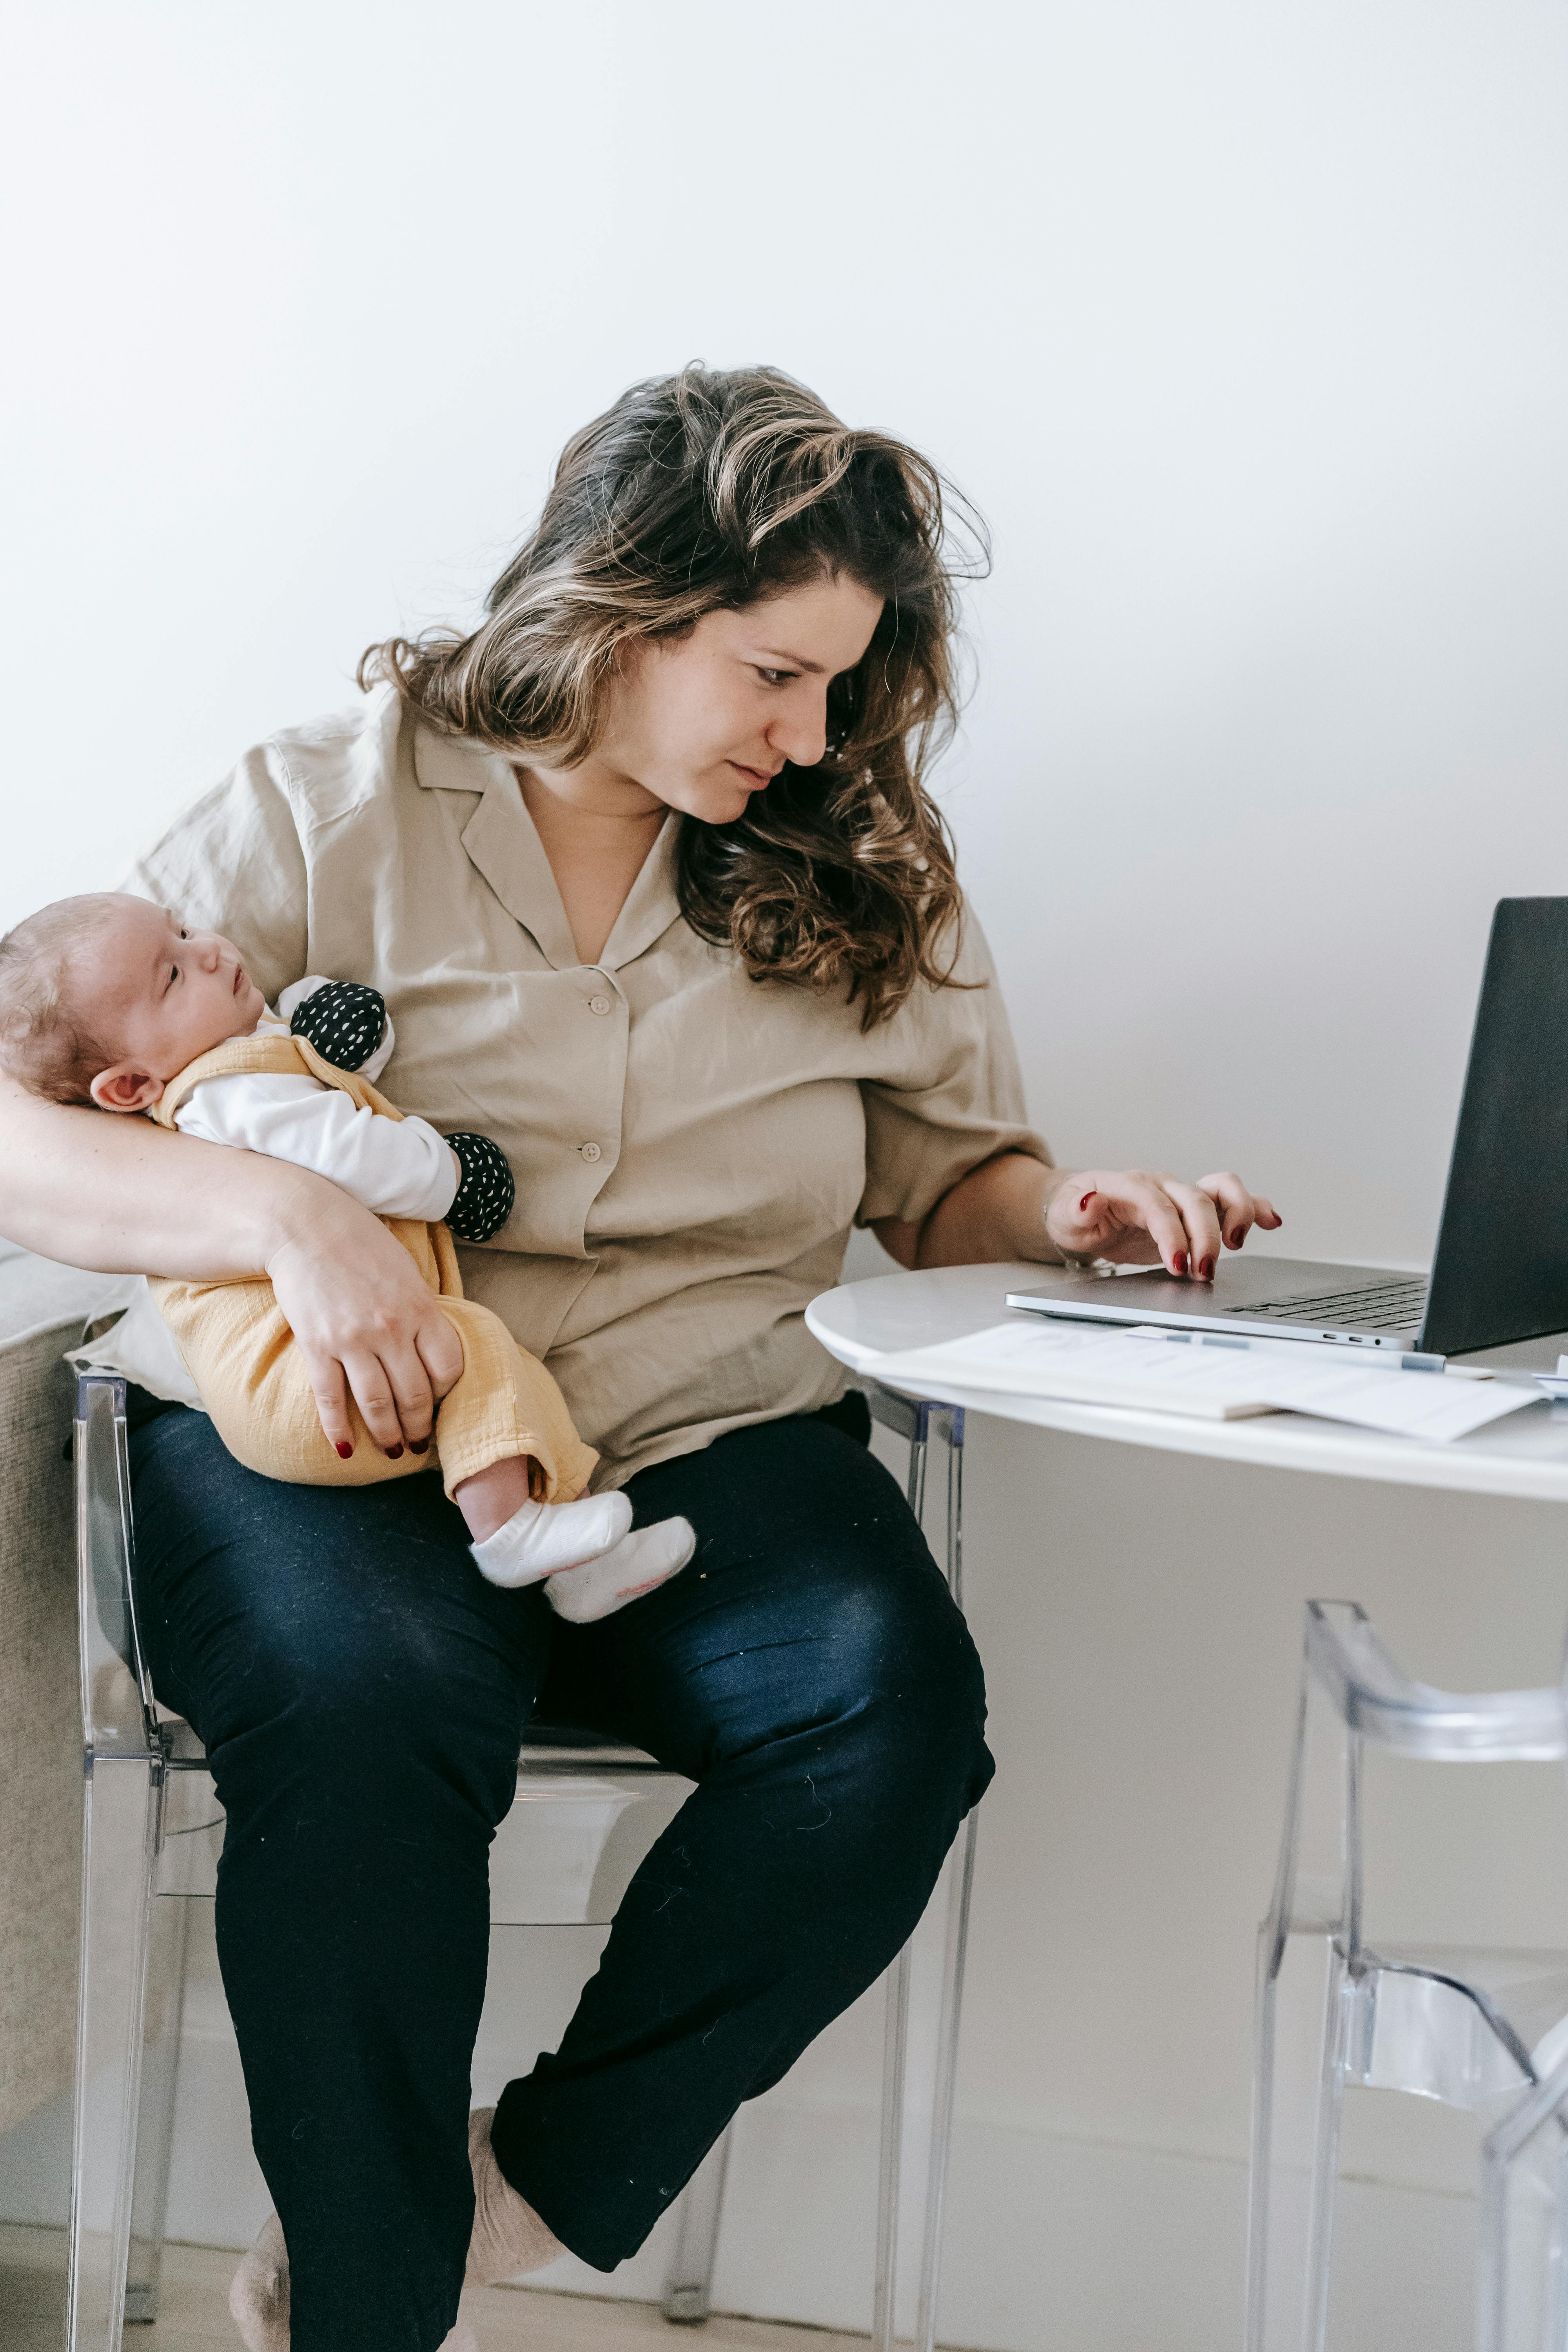 Cheerful young lady in sportswear holding boat pose with cute baby girl on  laps in modern apartment. Sporty adult mom doing baby yoga with little  daughter using online video on laptop at